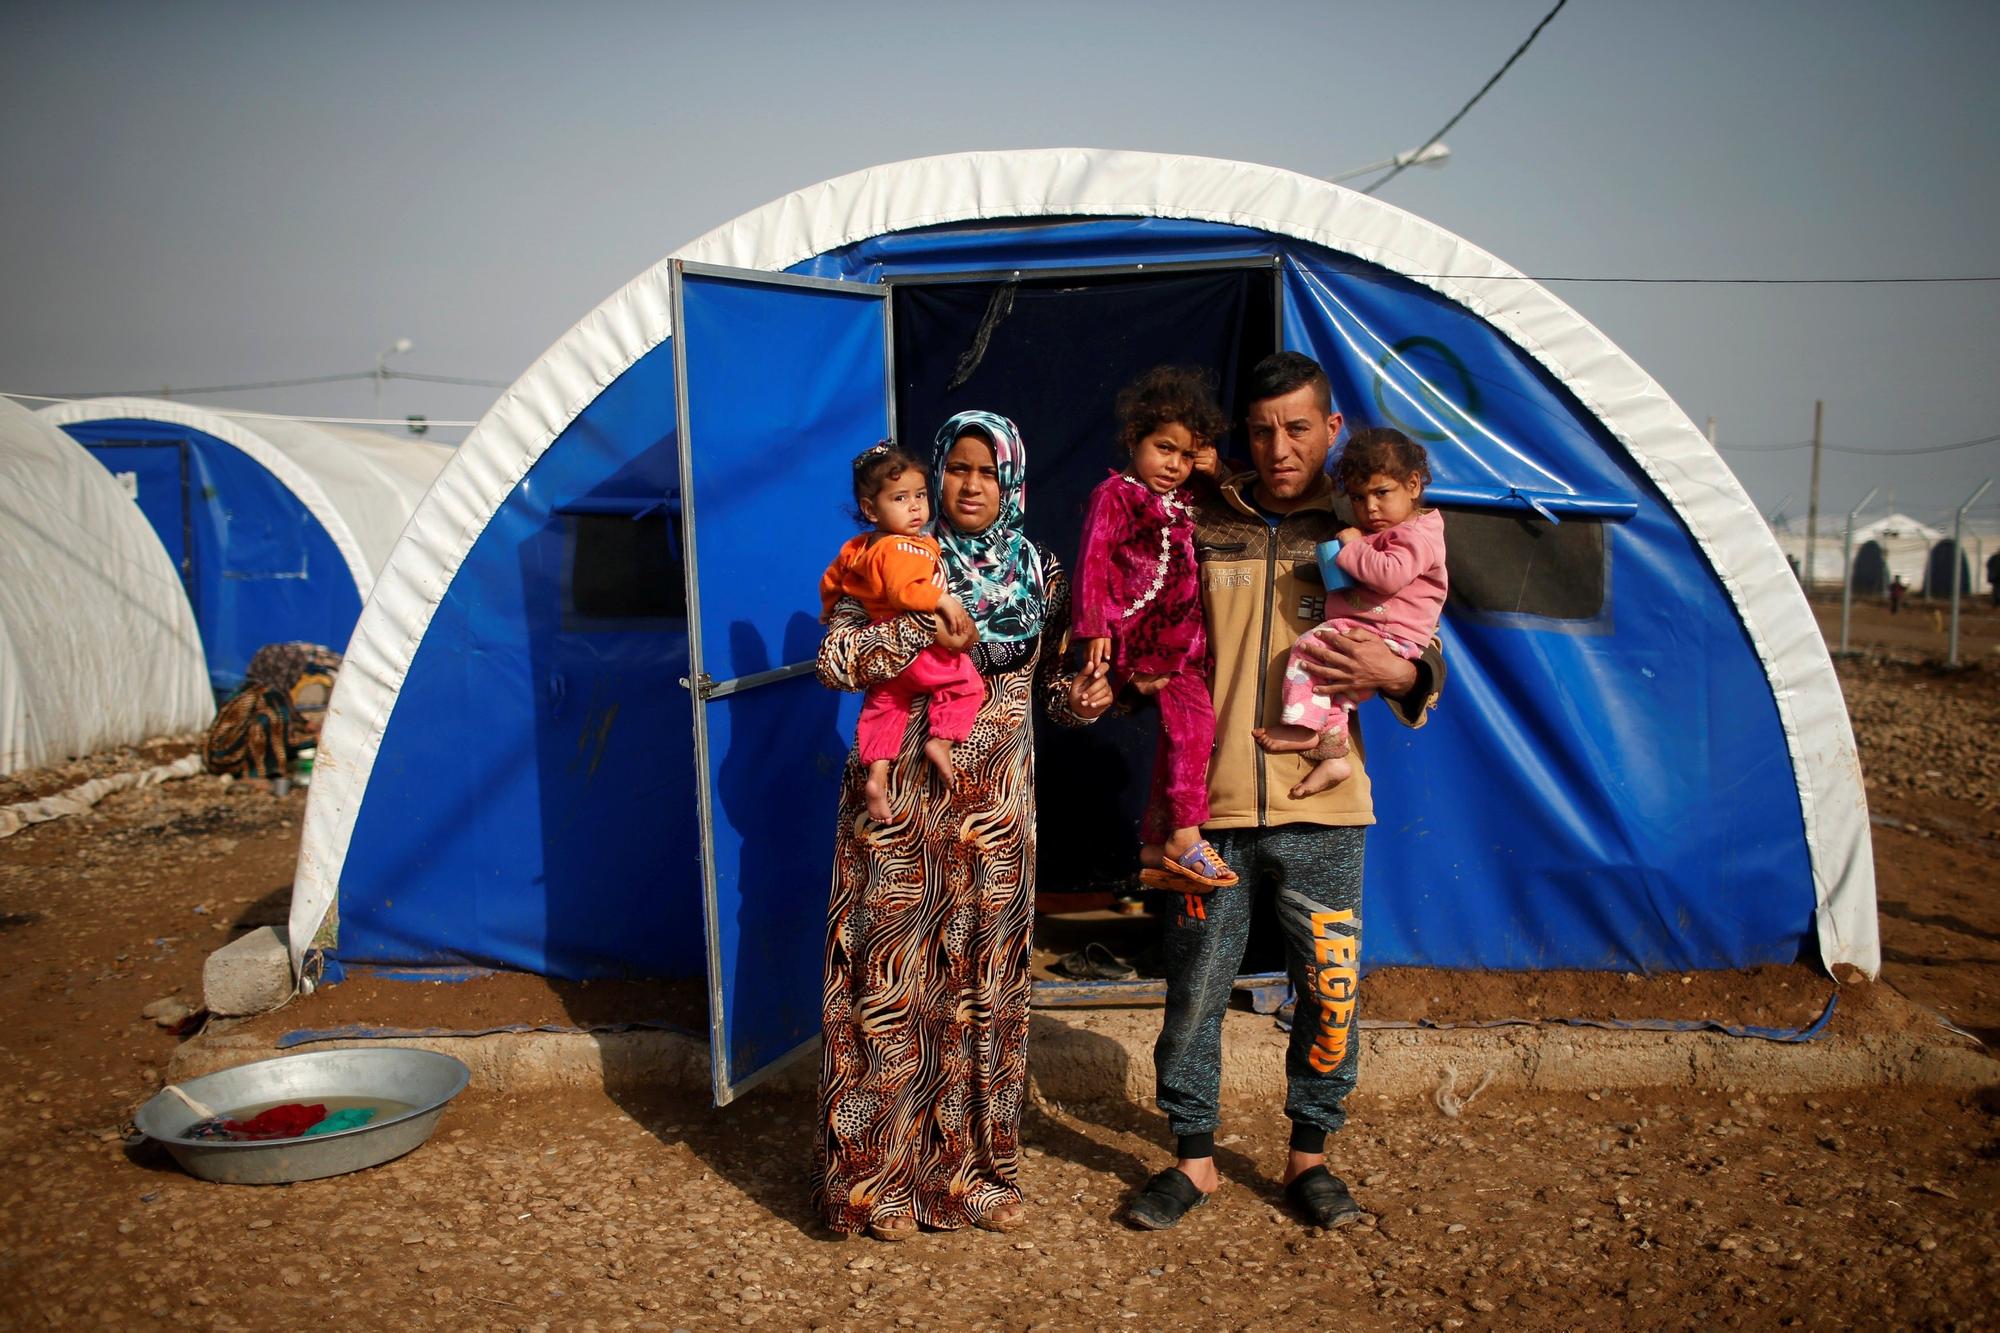 The Wider Image: Mosul displaced find refuge in camp Displaced Iraqi Amjad Galadi, 20, poses for a photograph with his wife and children at Hammam al-Alil camp south of Mosul, Iraq, March 29, 2017. Galadi and his wife, who got married three years ago, were anxious to save the children from shelling and air strikes. Galadi remembered covering his children's eyes as they escaped. The children are one, two and three years old. REUTERS/Suhaib Salem